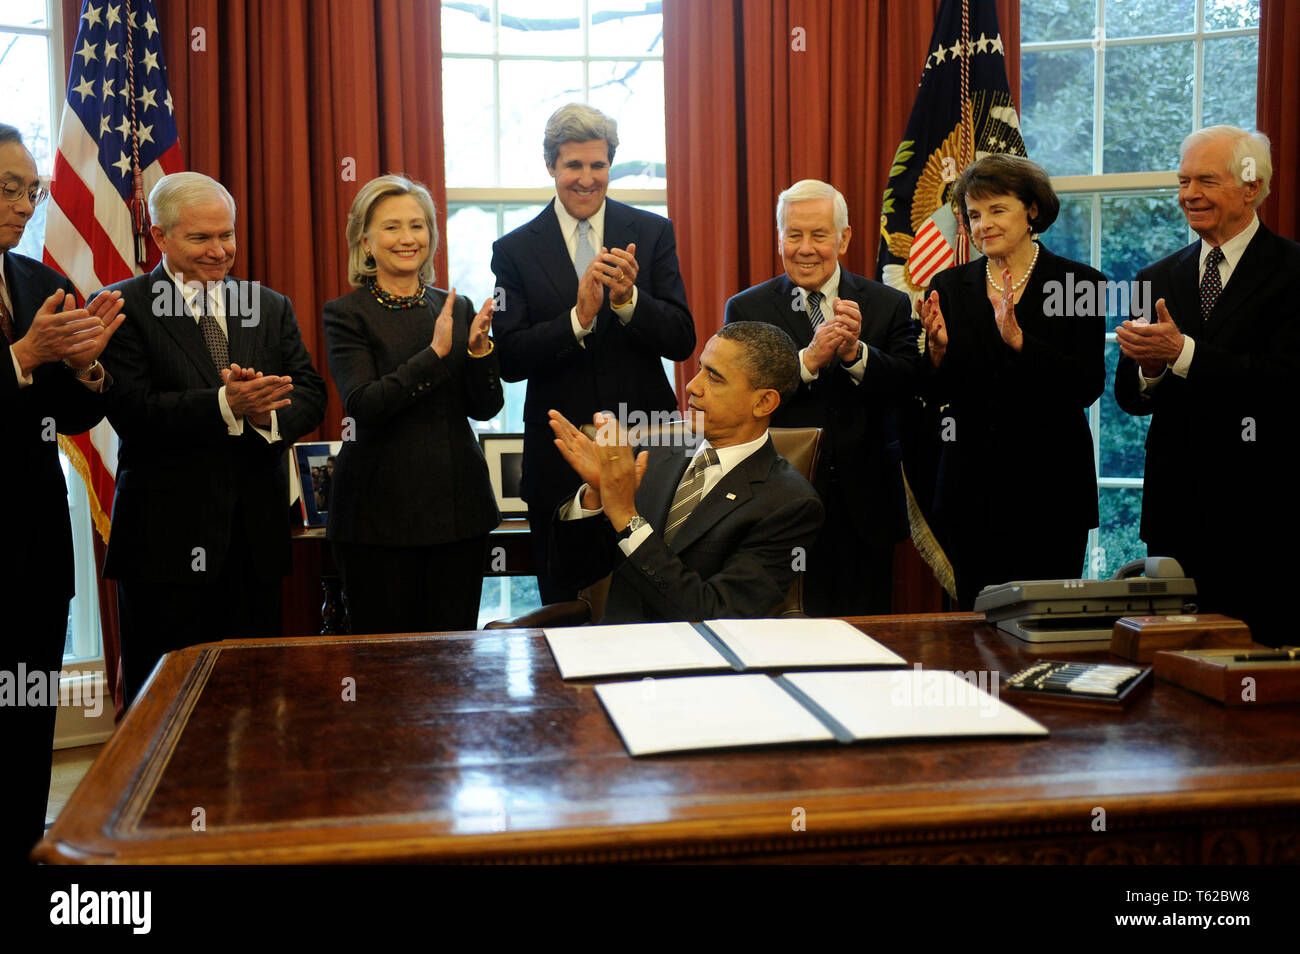 ***FILE PHOTO*** Former Senator Richard Lugar Has Passed Away. United States President Barack Obama signs the New START Treaty during a ceremony in the Oval Office of the White House, with, from left, U.S. Secretary of Energy Steven Chu, U.S. Secretary of Defense Robert Gates, U.S. Secretary of State Hillary Rodham Clinton, U.S. Senator John Kerry (Democrat of Massachusetts), U.S. Senator Richard Lugar (Republican of Indiana), U.S. Senator Dianne Feinstein (Democrat of California), U.S. Senator Thad Cochran (Republican of Mississippi). Credit: Leslie E. Kossoff/Pool via CNP /MediaPunch Stock Photo